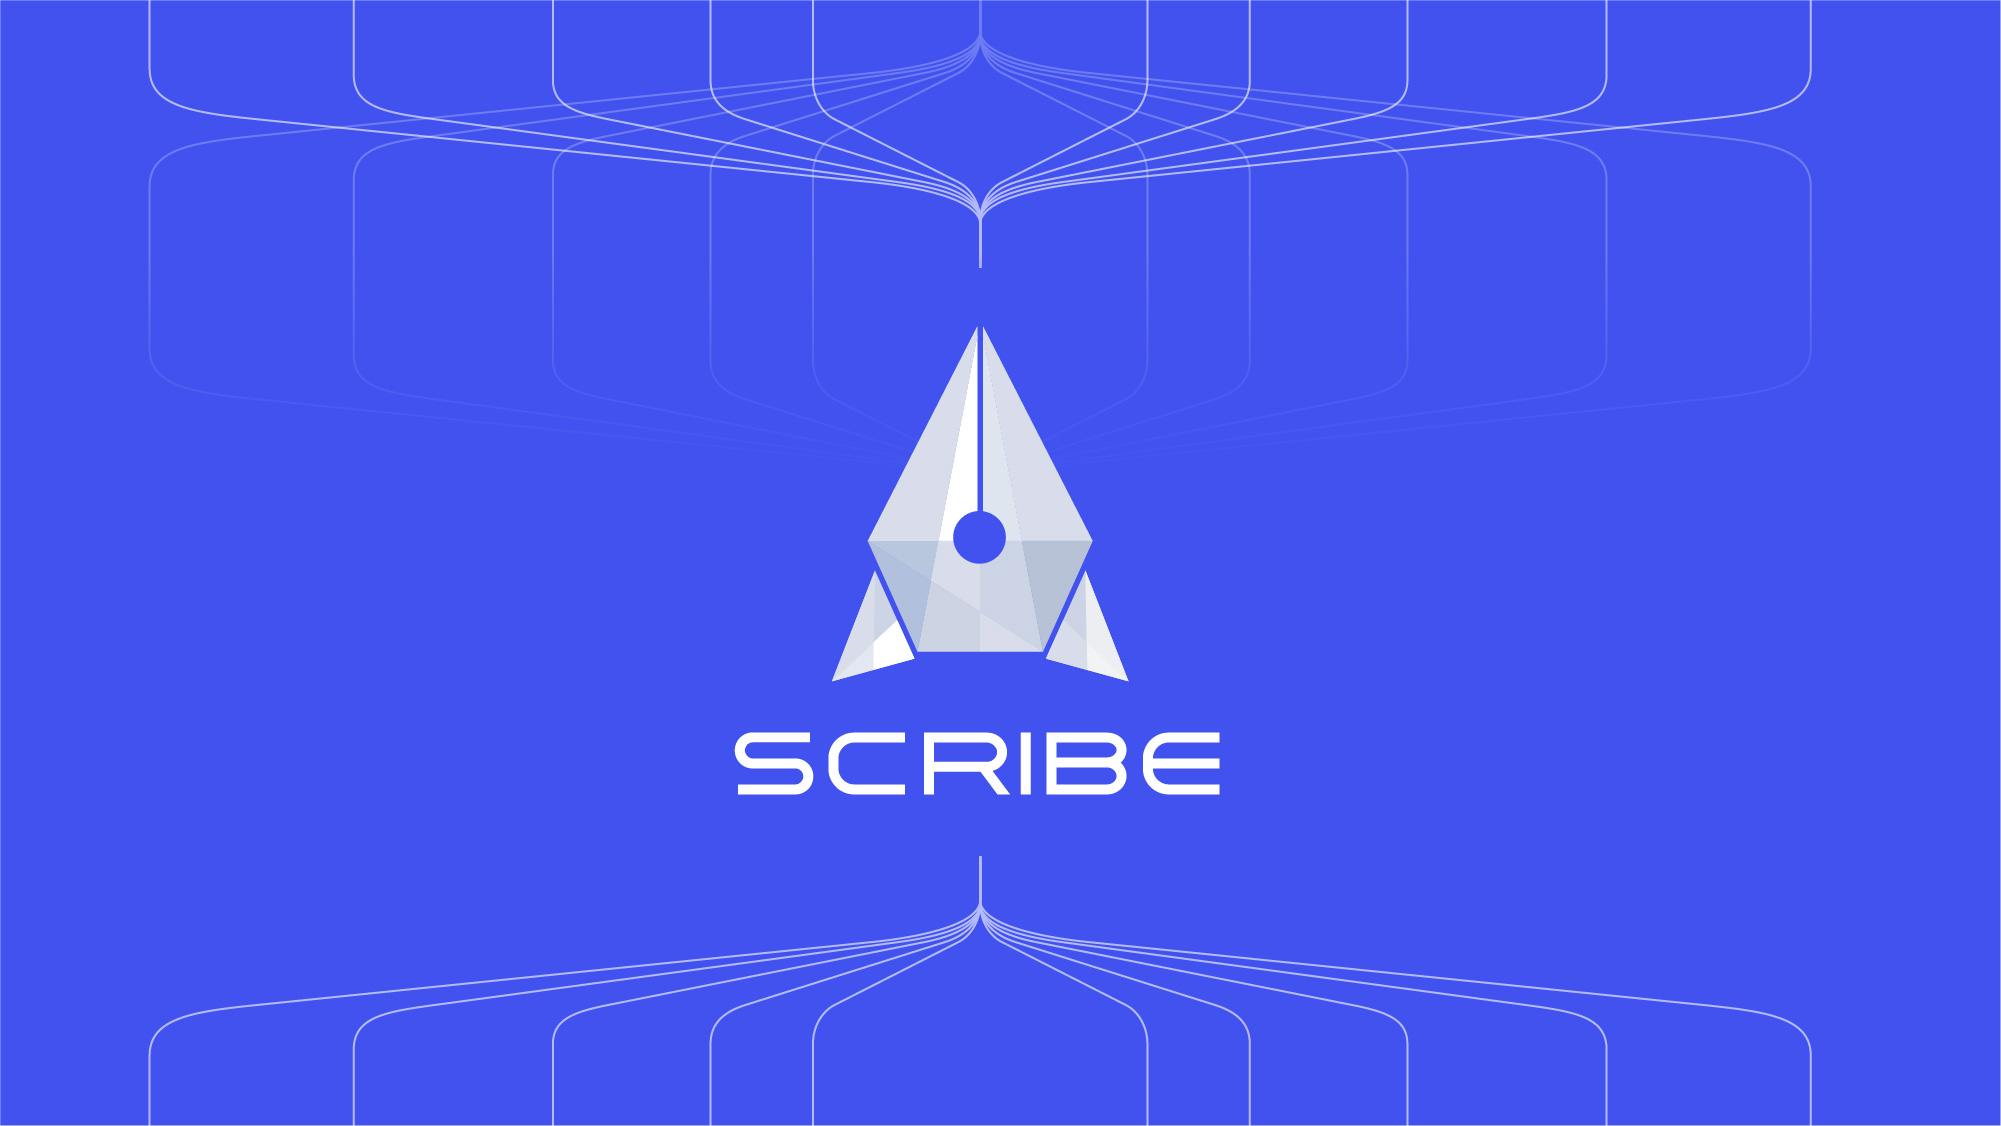 Scribe: Transporting petabytes per hour via a distributed, buffered queueing system